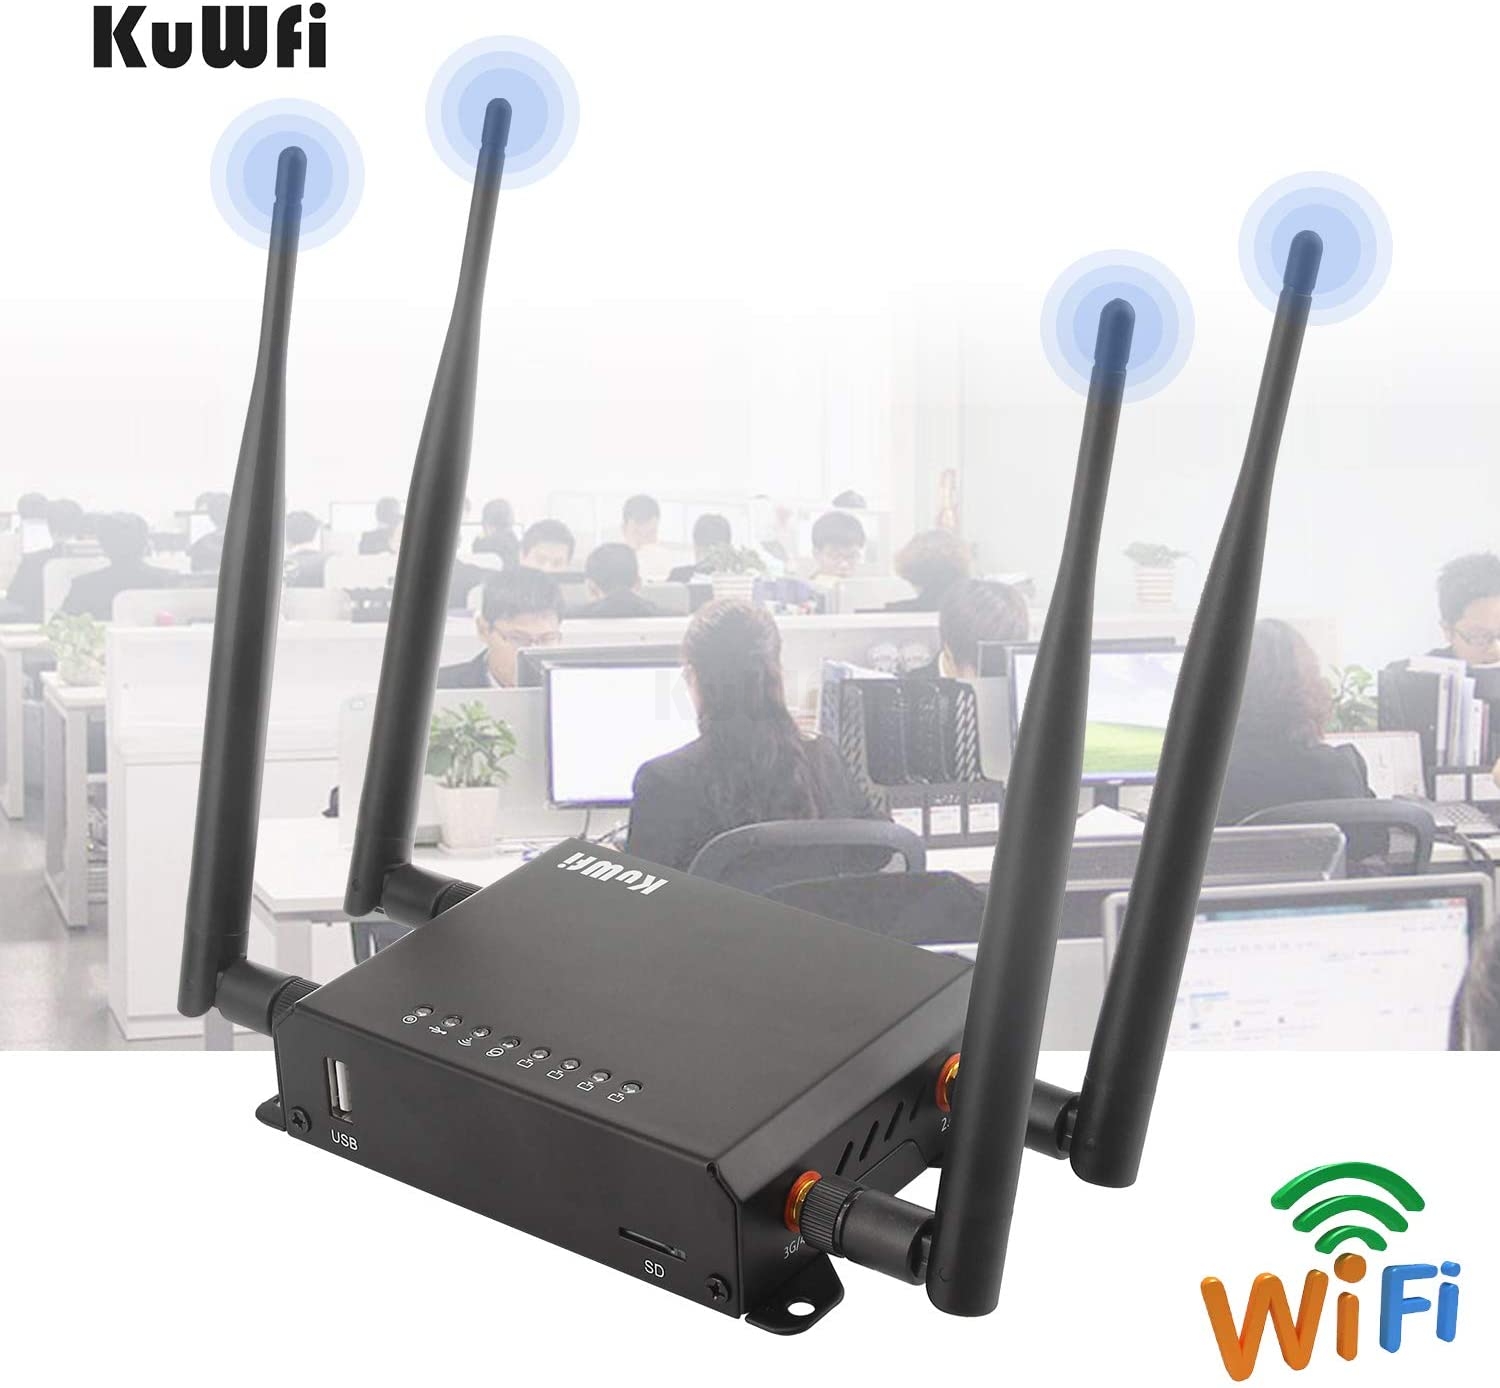 KuWFi 300Mbps 3G 4G LTE Car WiFi Wireless Router Extender Strong Signal Car WiFi Routers with USB Port SIM Card Slot with External Antennas for USA/Canada/Mexico SIM Card 